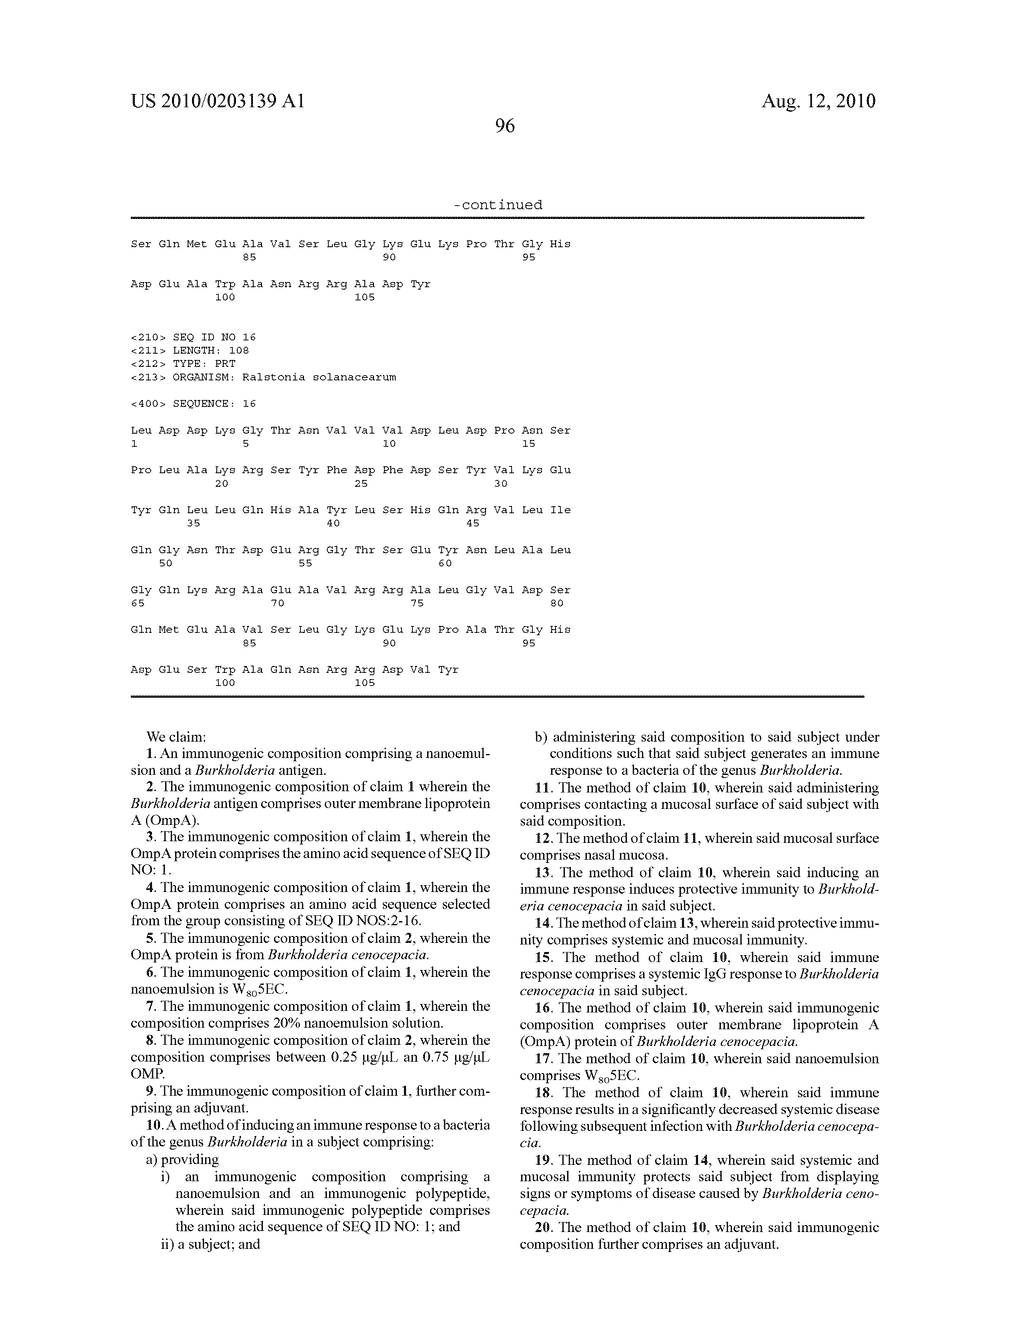 NANOEMULSION THERAPEUTIC COMPOSITIONS AND METHODS OF USING THE SAME - diagram, schematic, and image 136